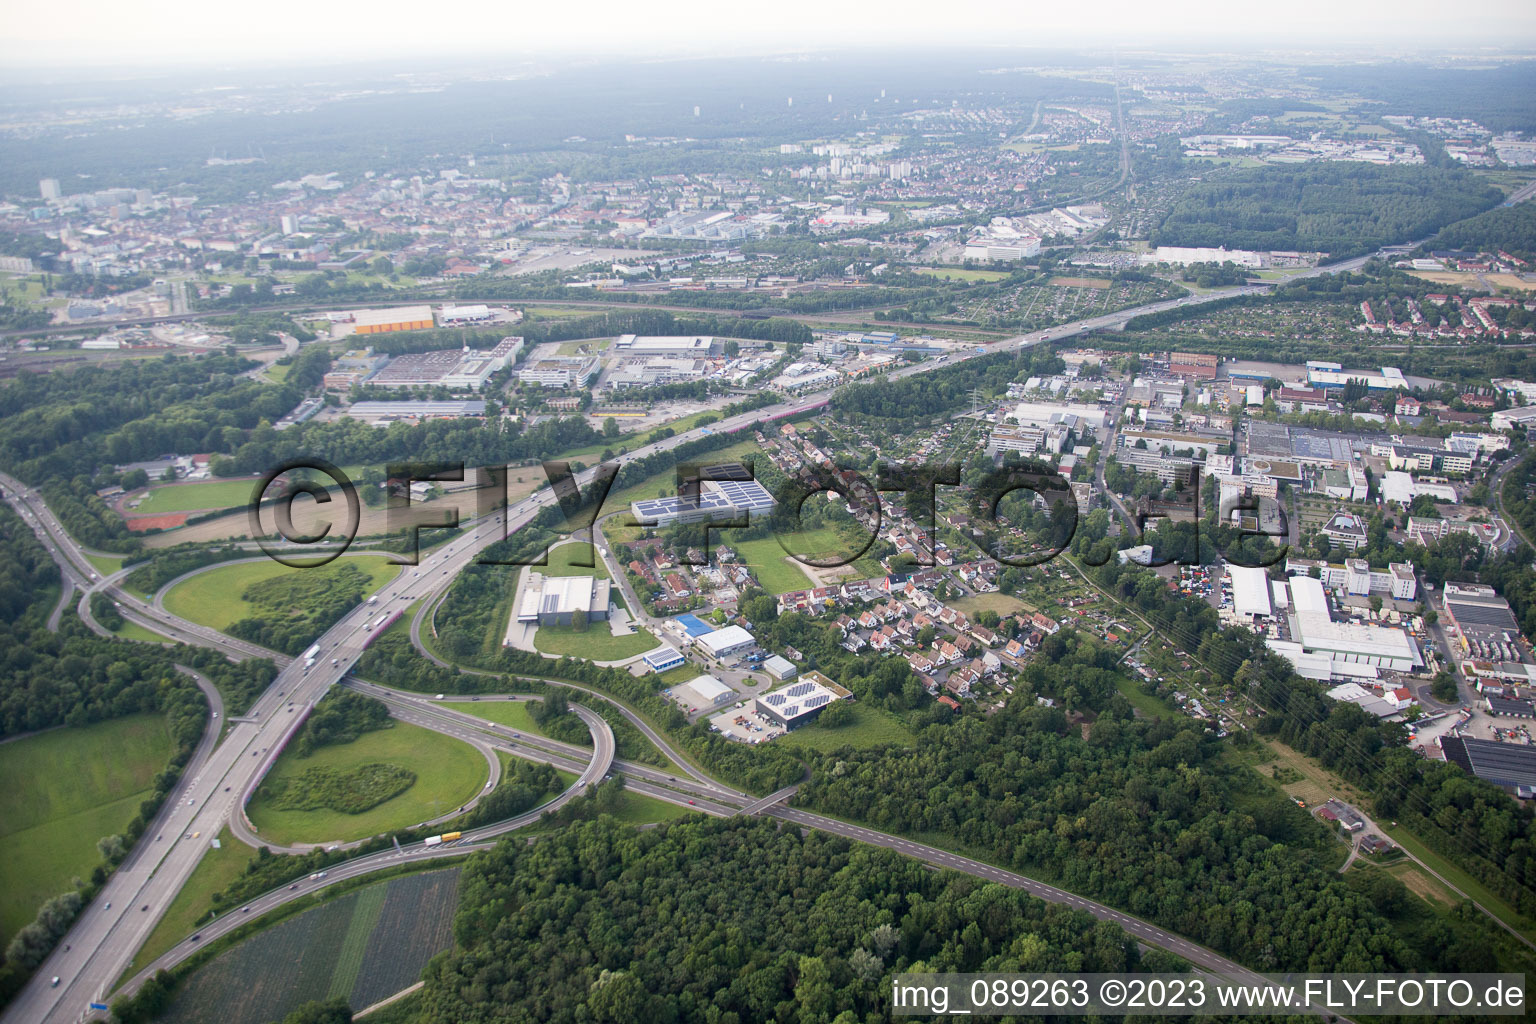 Karlsruhe triangle A8/A5 in the district Durlach in Karlsruhe in the state Baden-Wuerttemberg, Germany